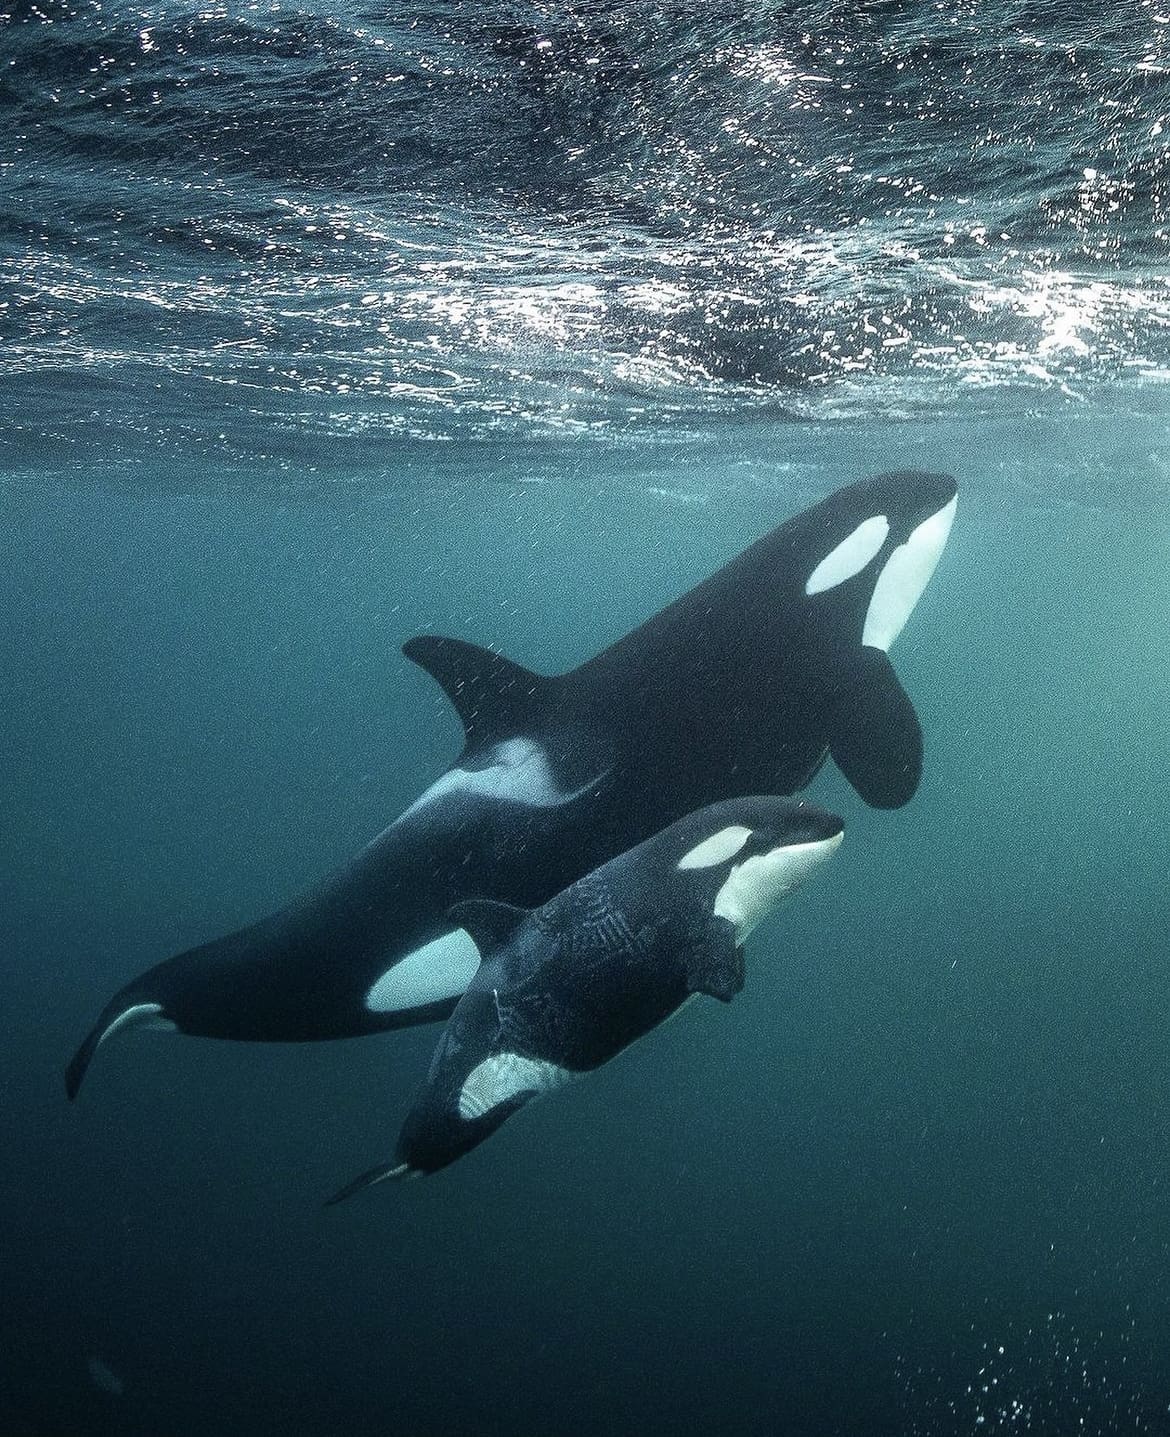 Orca mother and calf